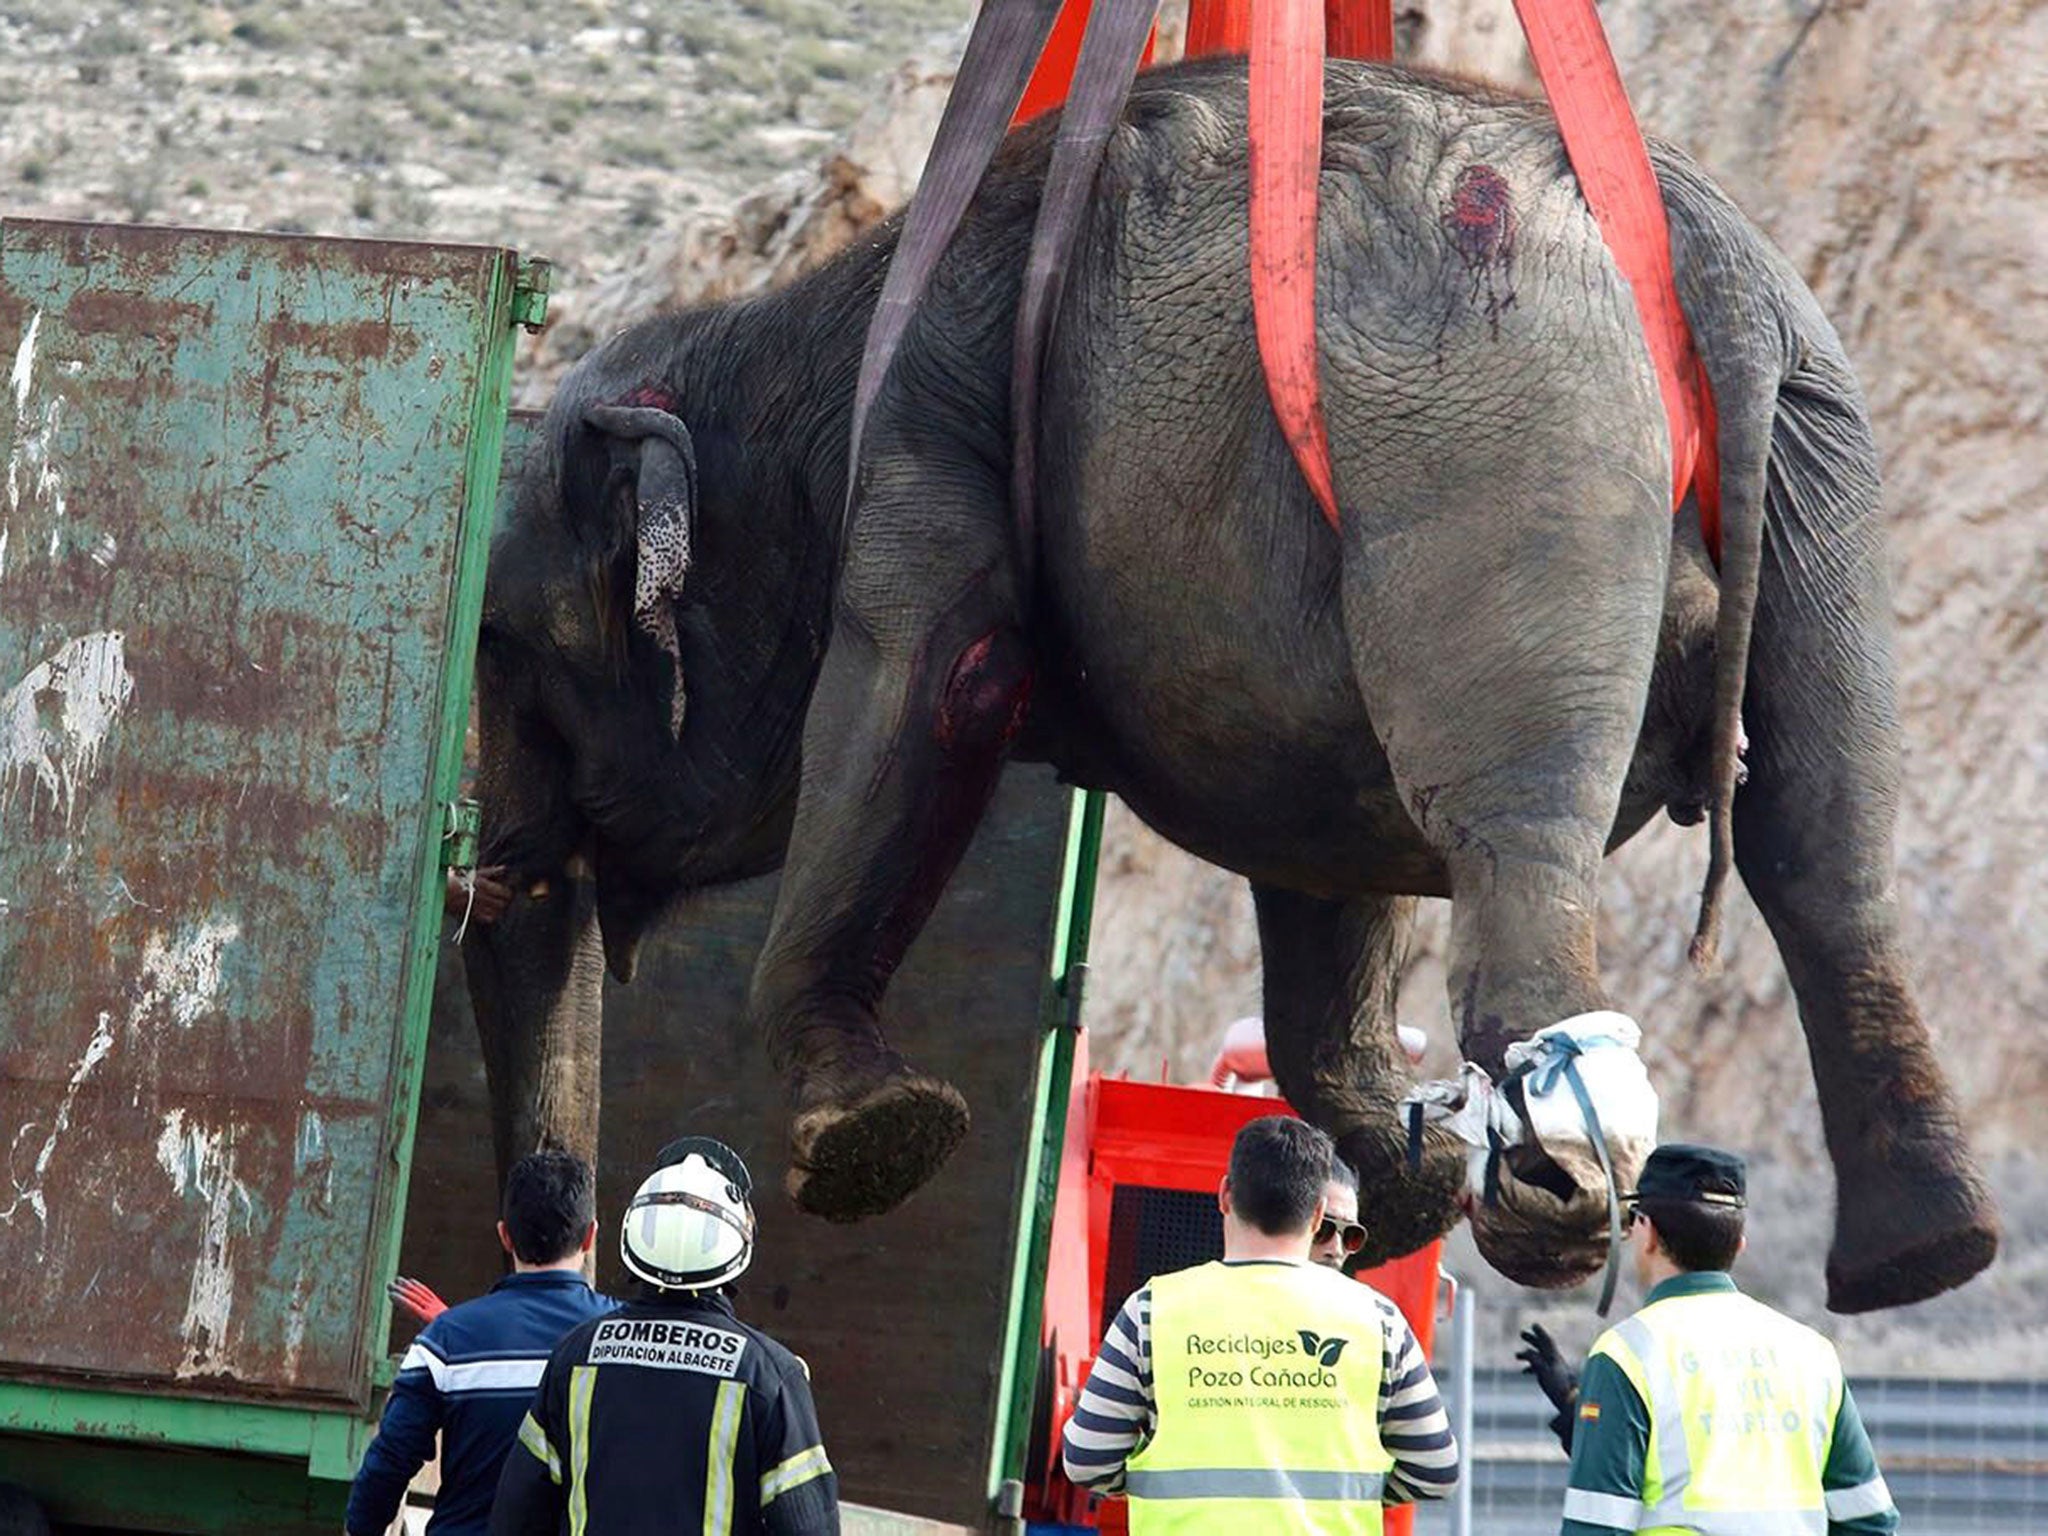 The four surviving elephants are being treated by vets